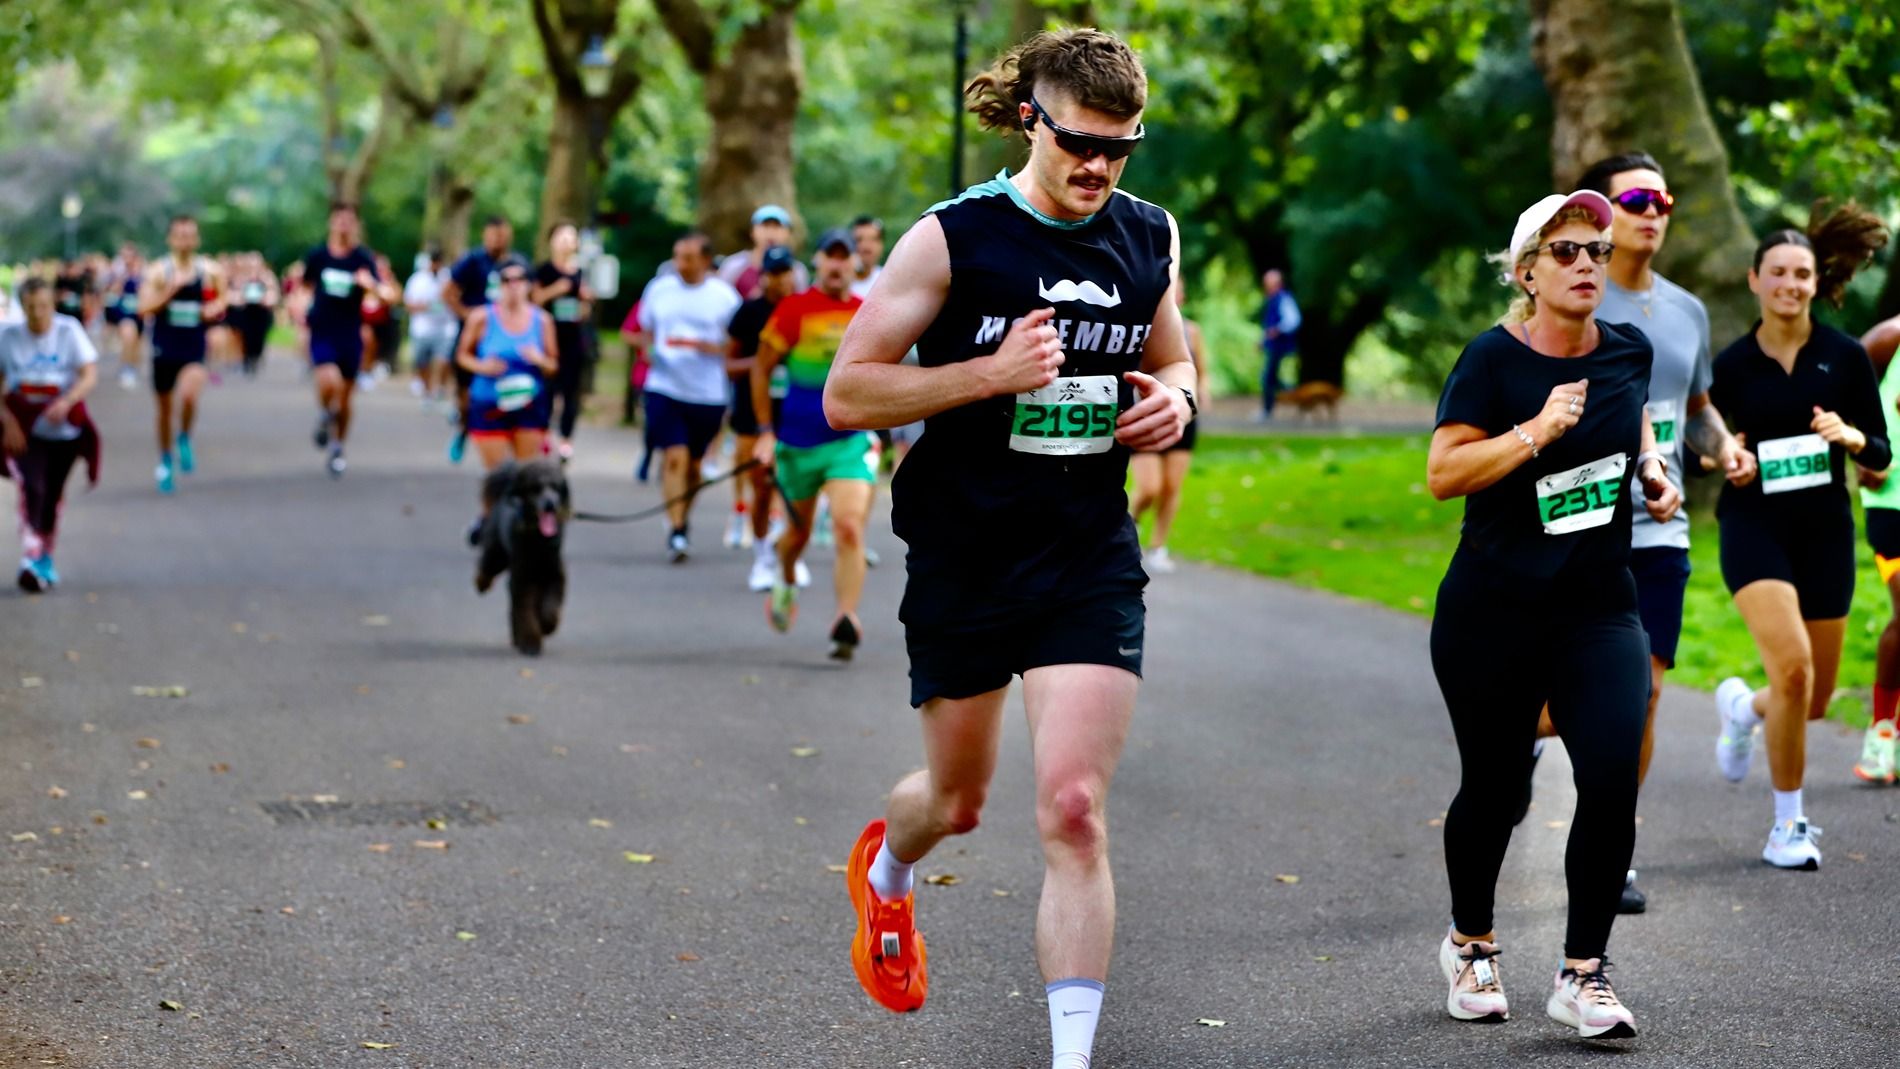 Photo of athletic man, running in a busy race, wearing Movember-branded attire.